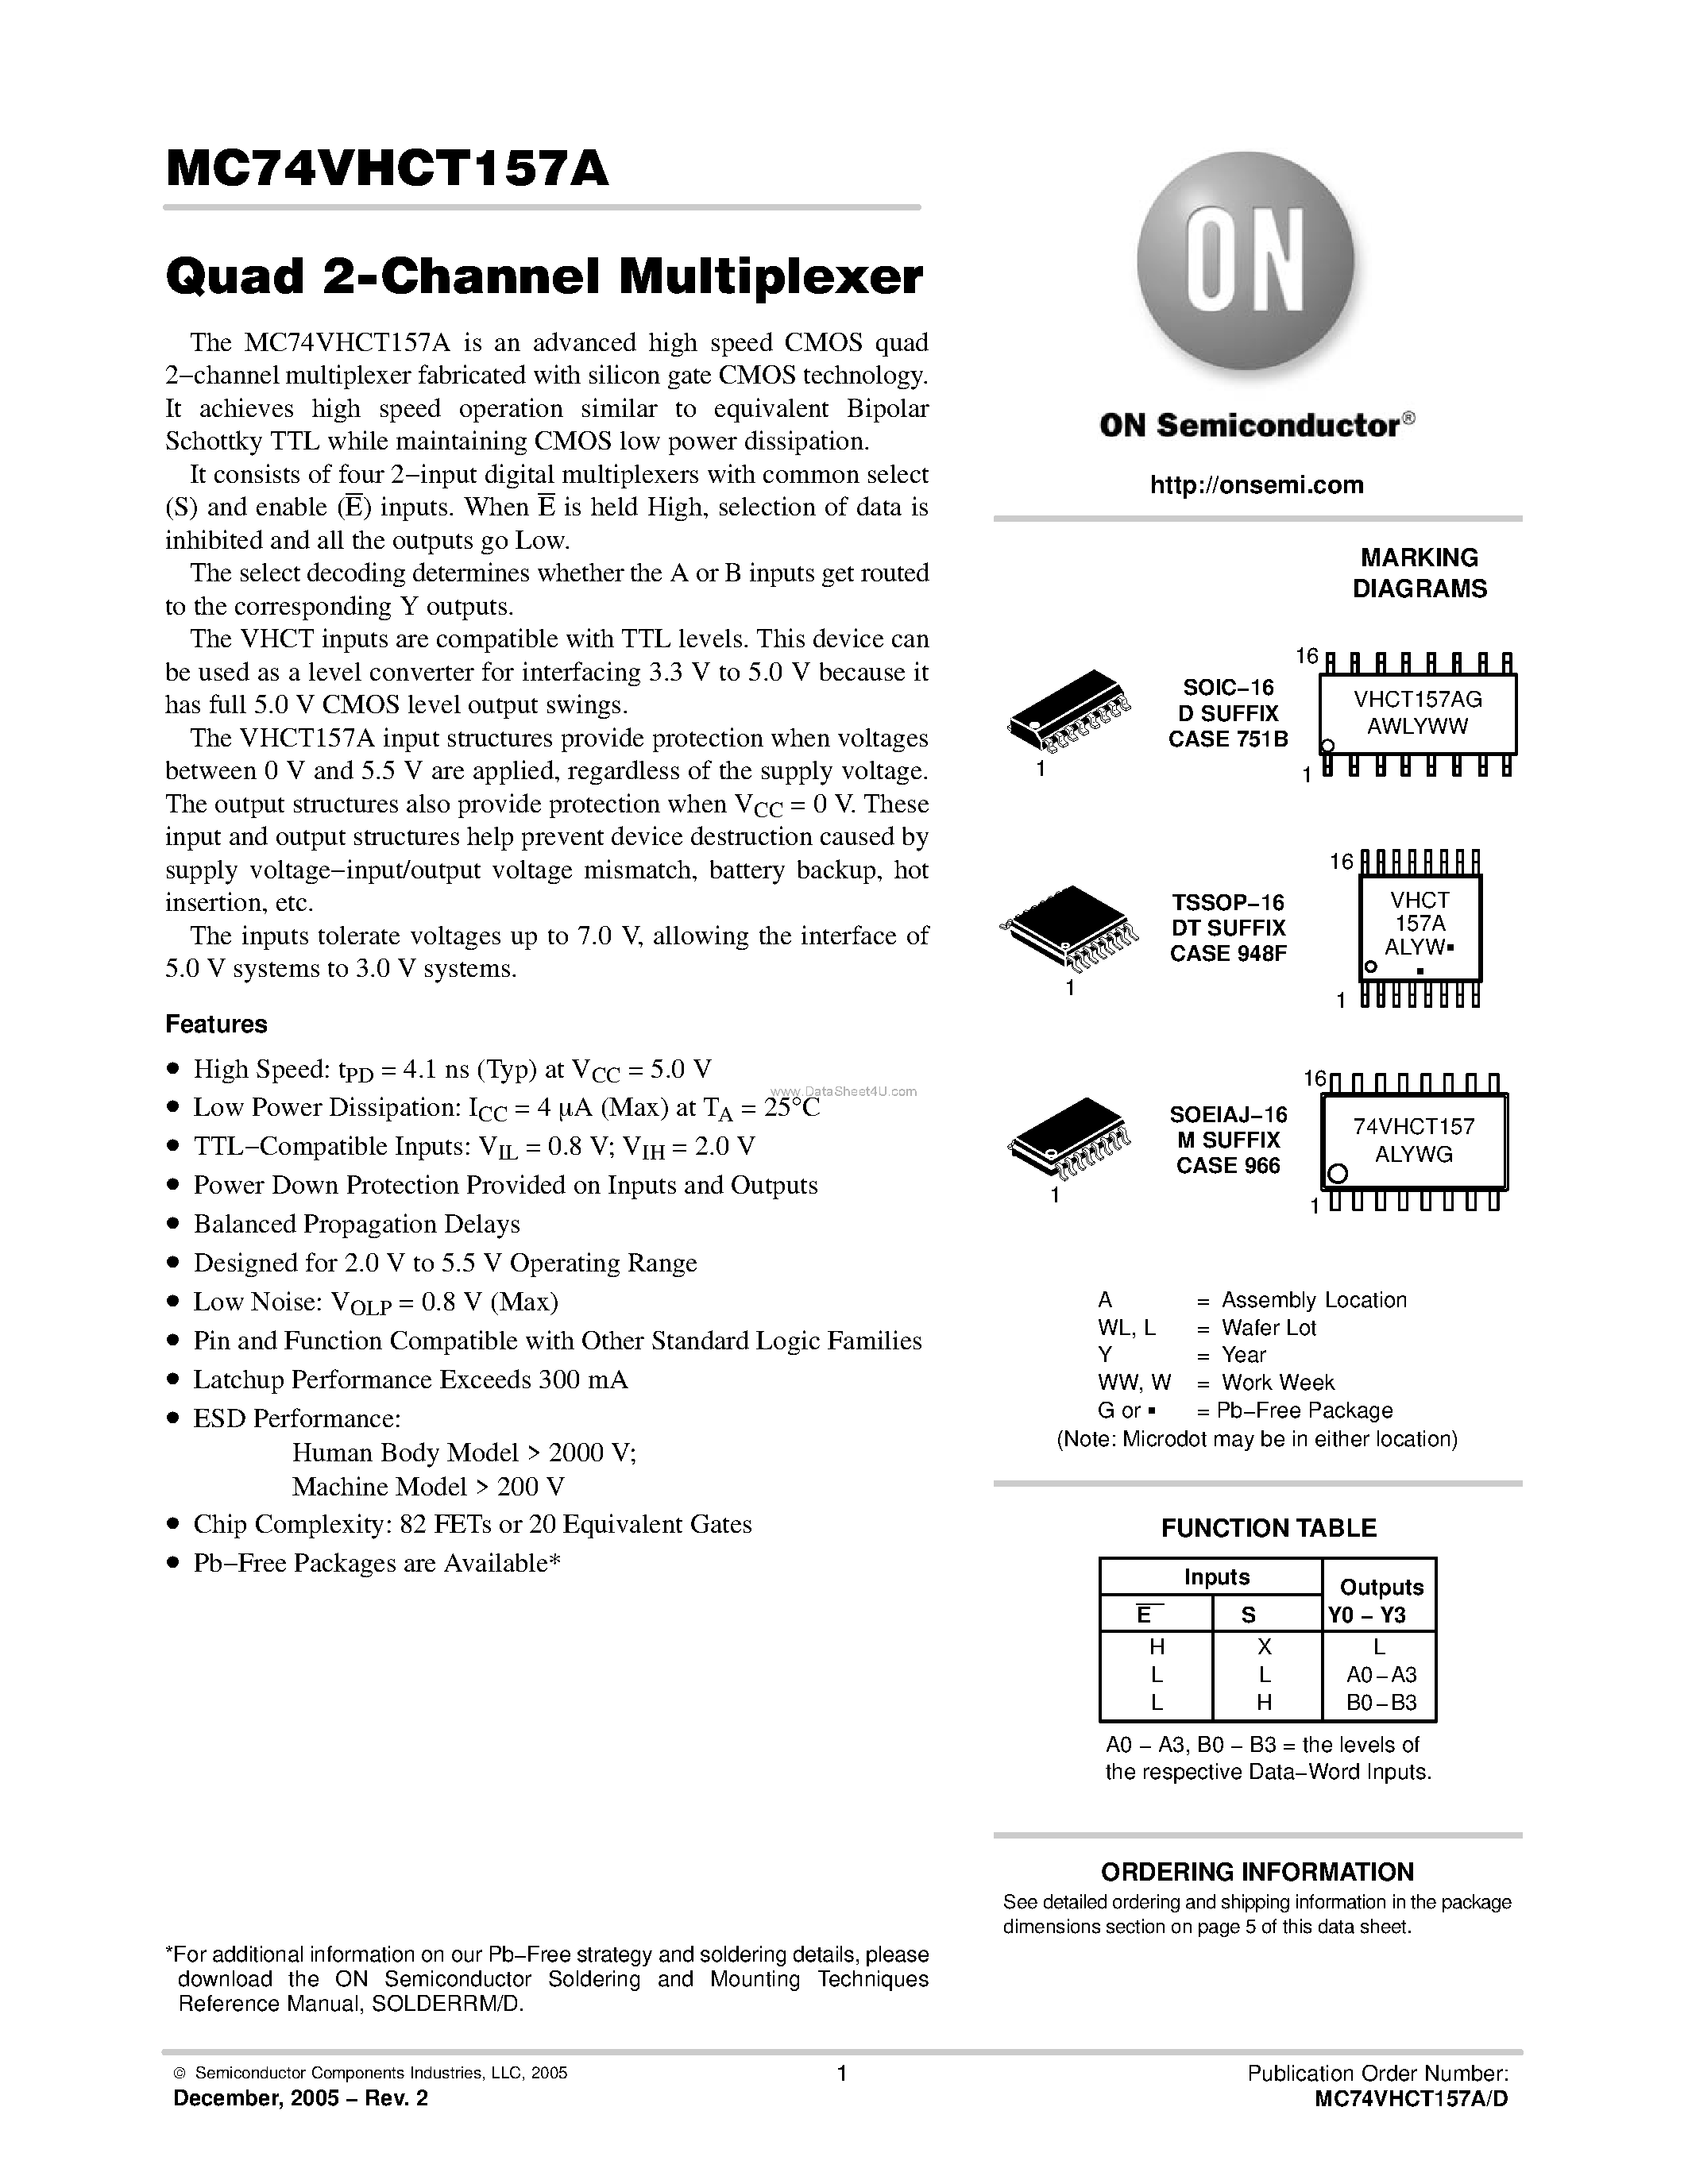 Datasheet MC74VHCT157A - Quad 2-Channel Multiplexer page 1